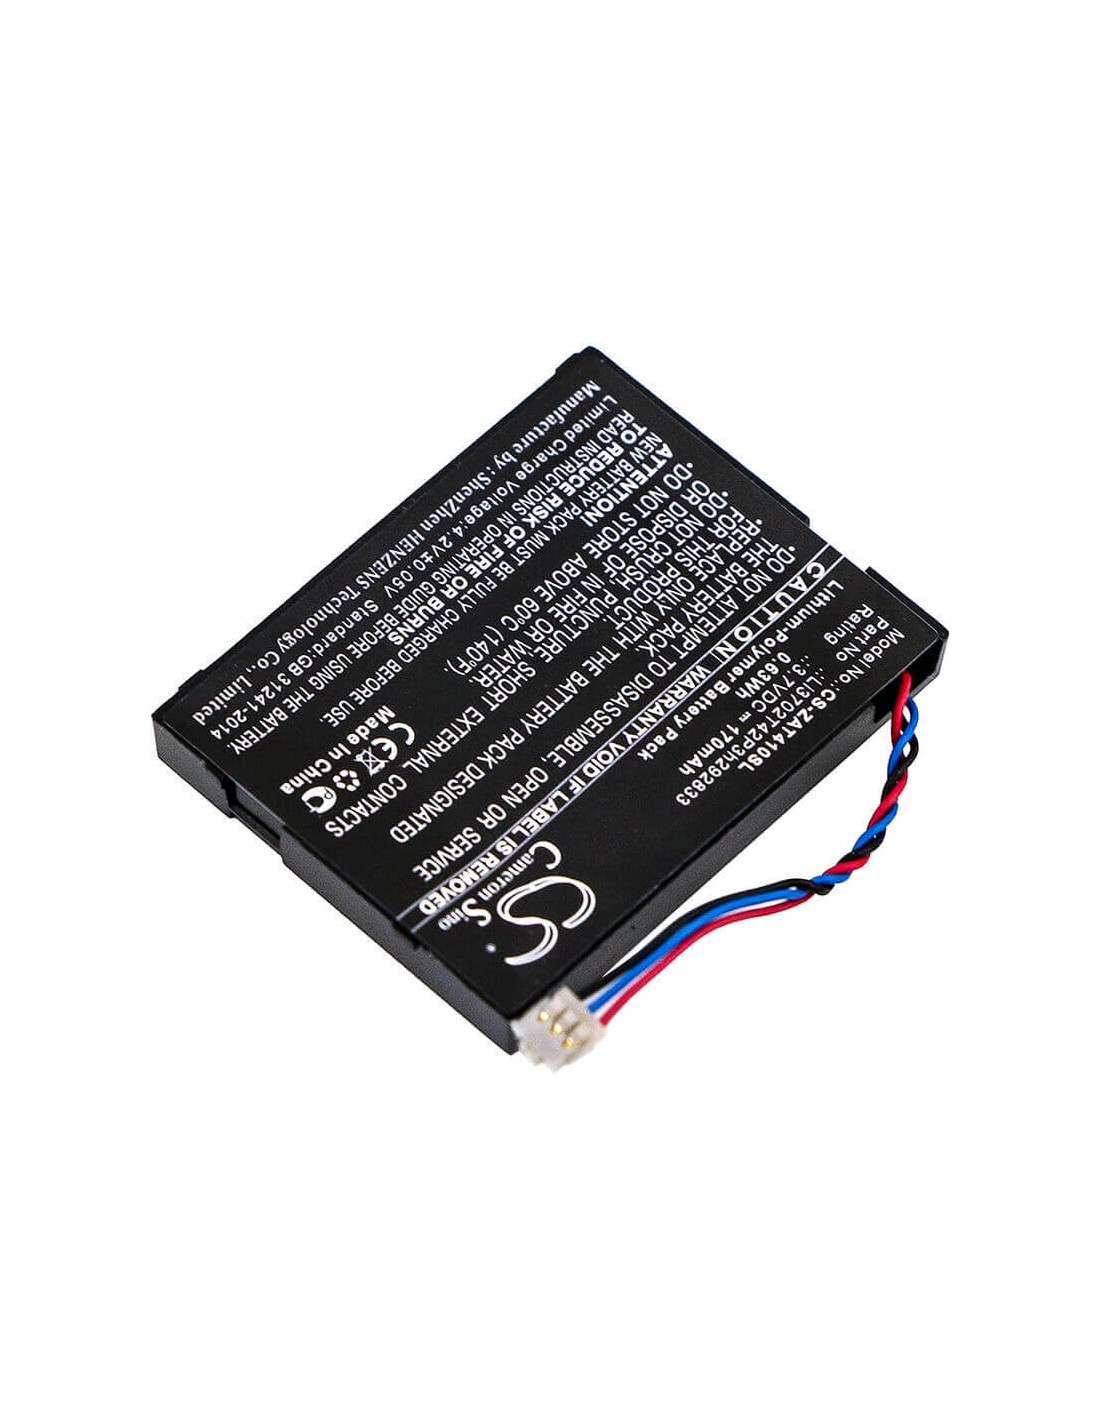 Battery for Zte, 2ahr8-at41, At41, Gd500 3.7V, 170mAh - 1.18Wh